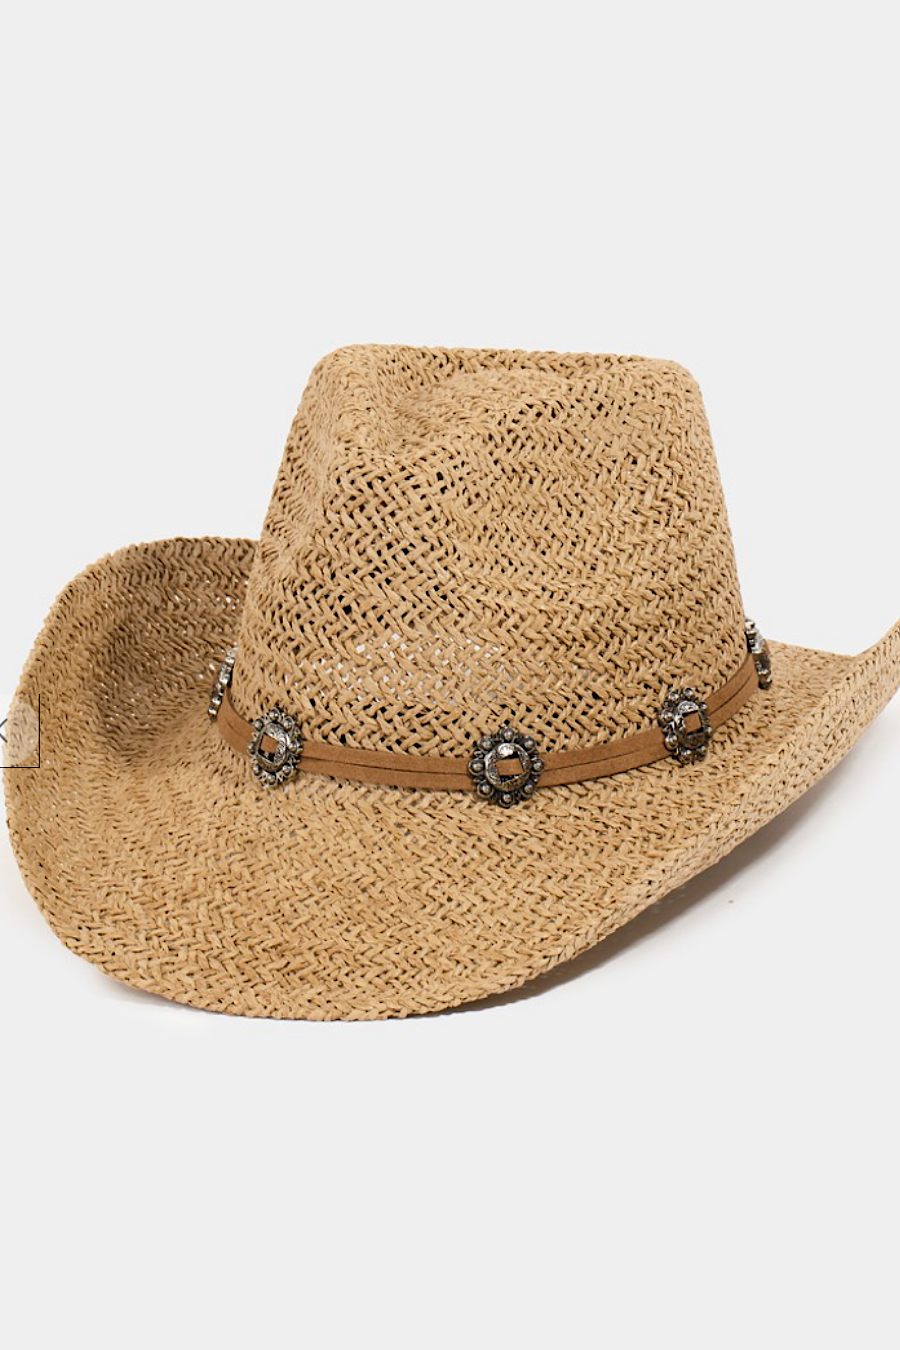 Straw Braided Cowboy Hat in 3 Colors!